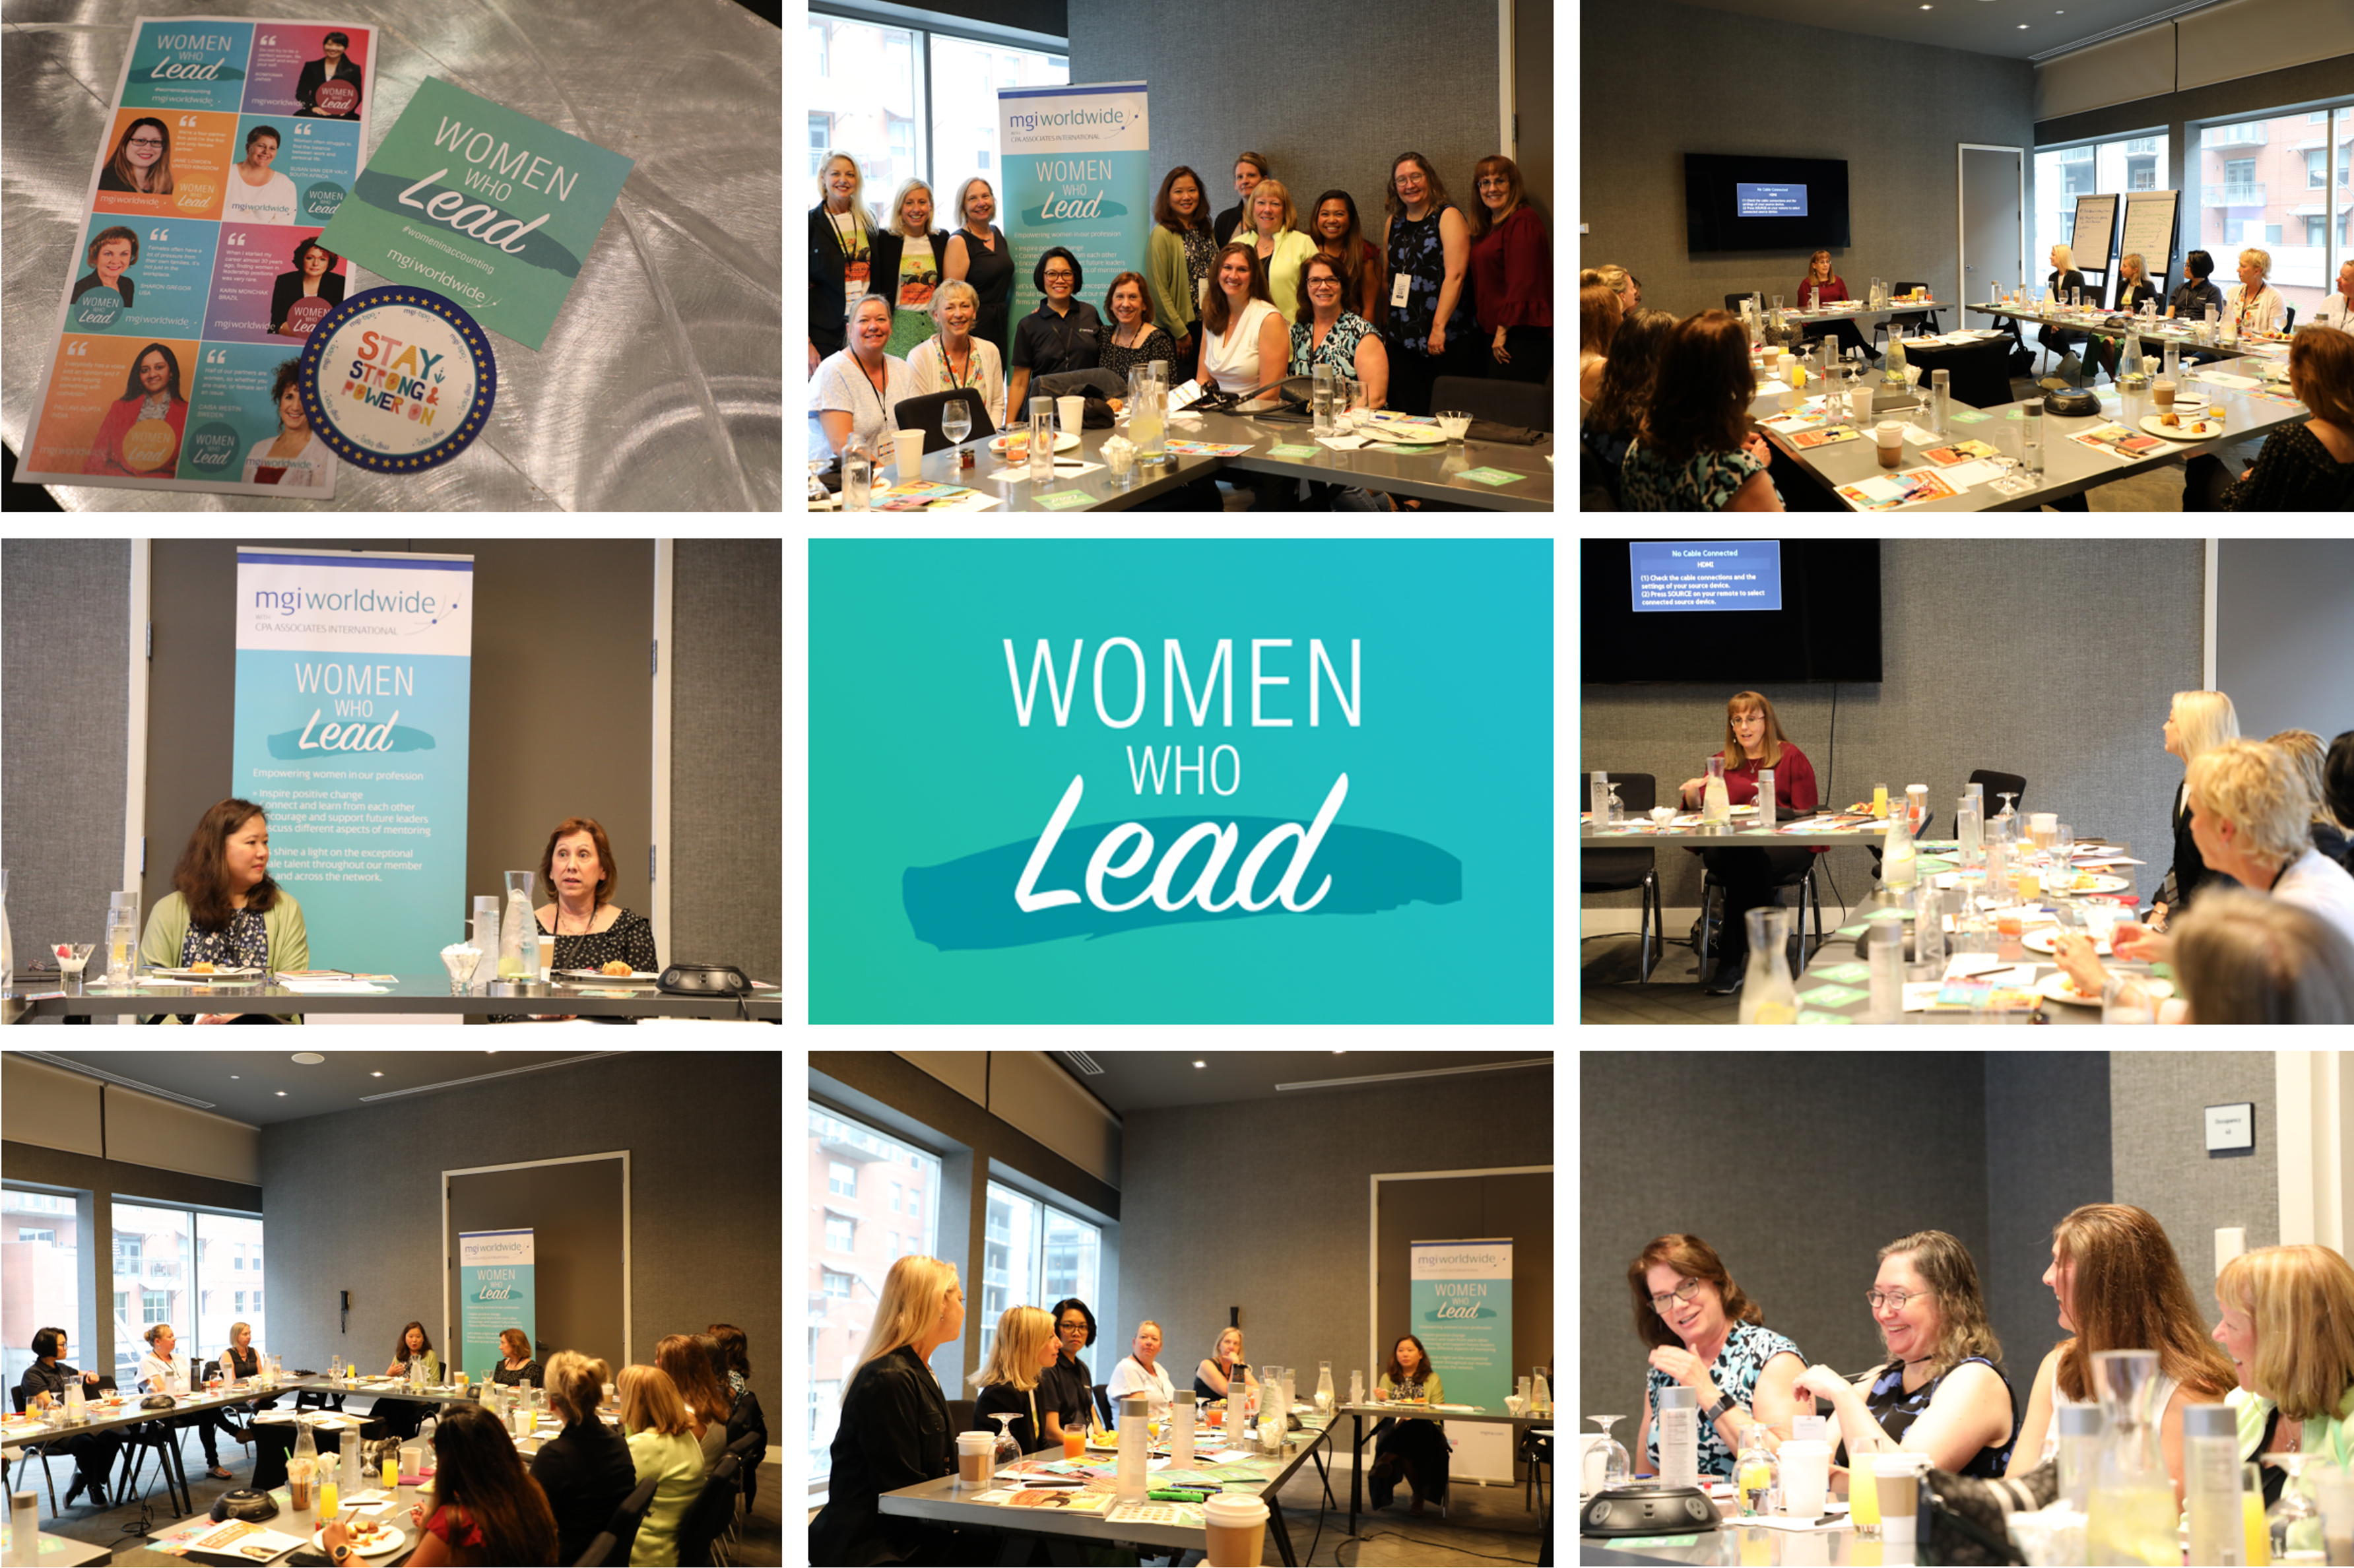 MGI Worldwide accounting network Women who Lead group holds breakfast meeting in Austin, Texas